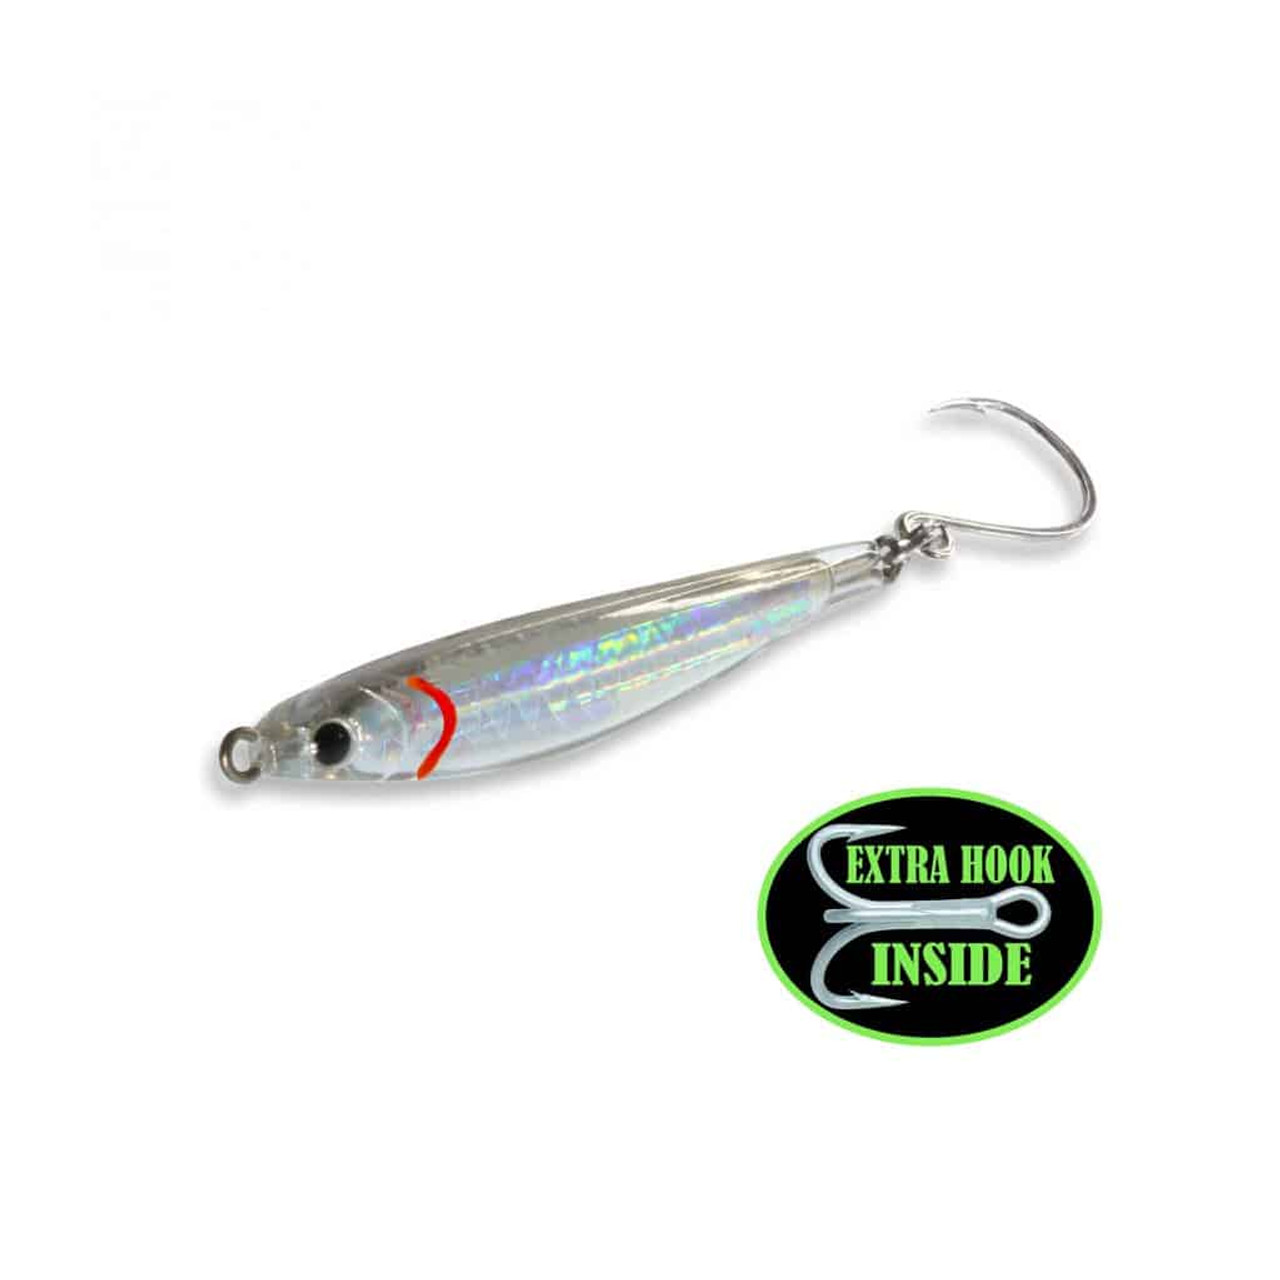 Fat Cow Lures Fat Minnow Epoxy Resin Jig 2.5 Inch 1 Ounce Chrome Silver